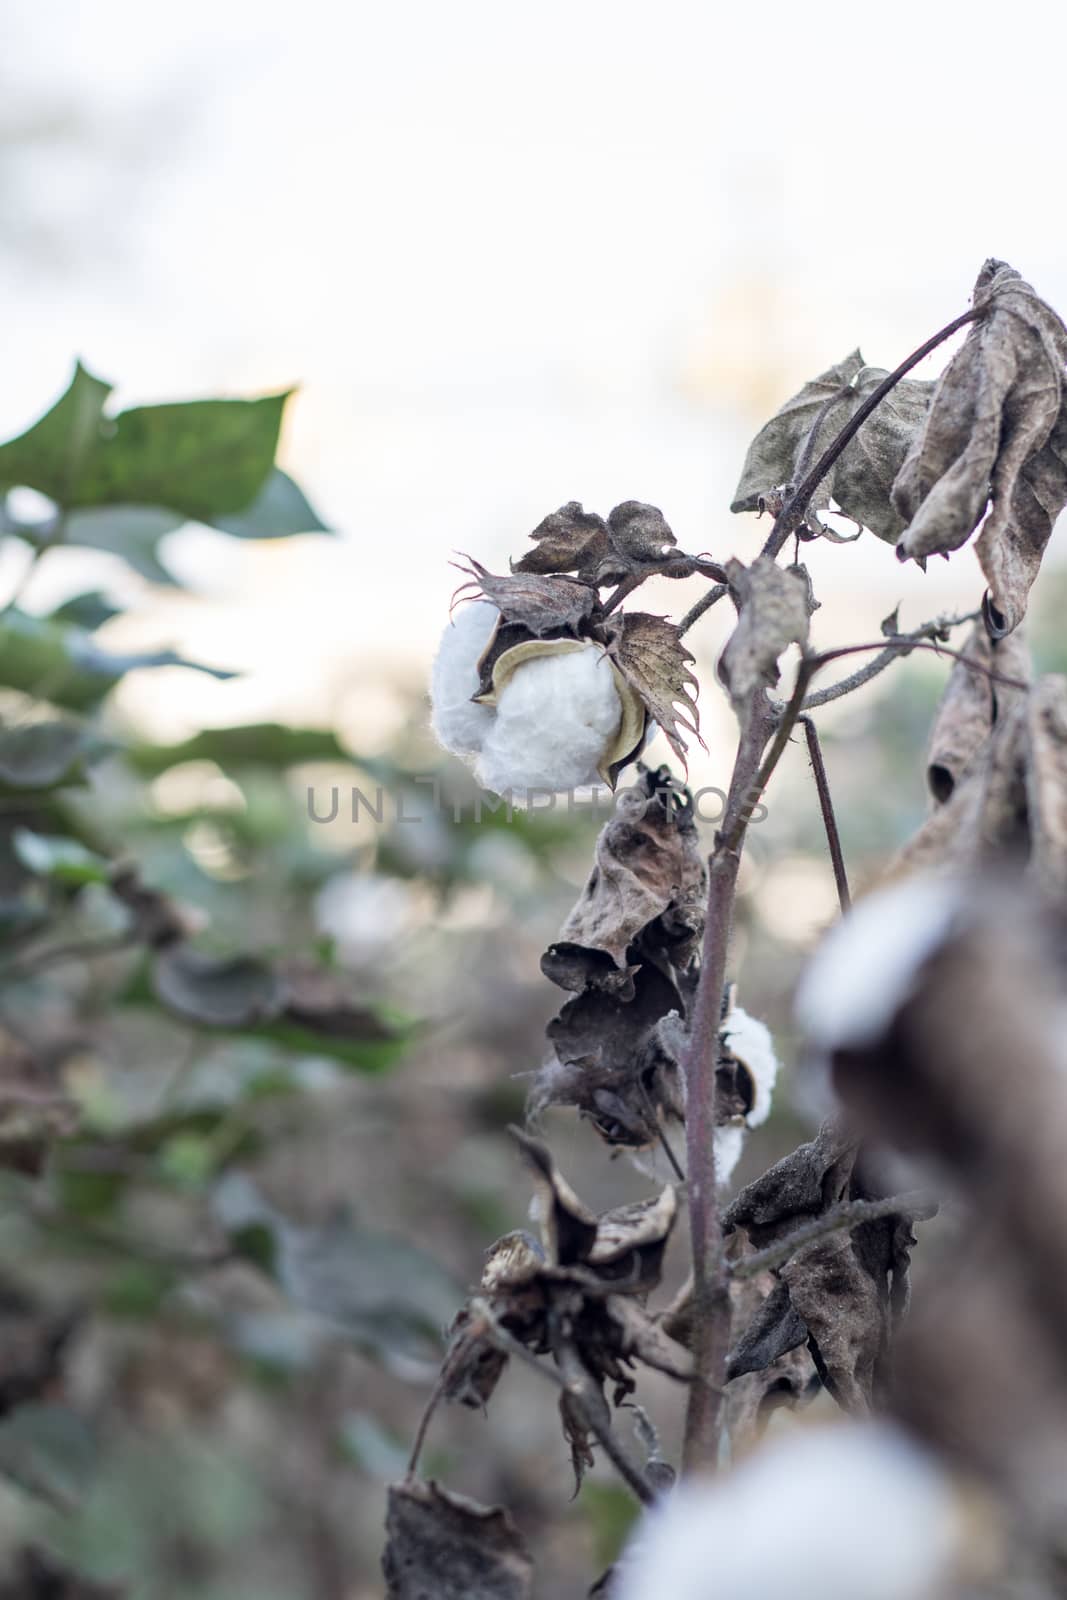 Ripe cotton grows on the branch